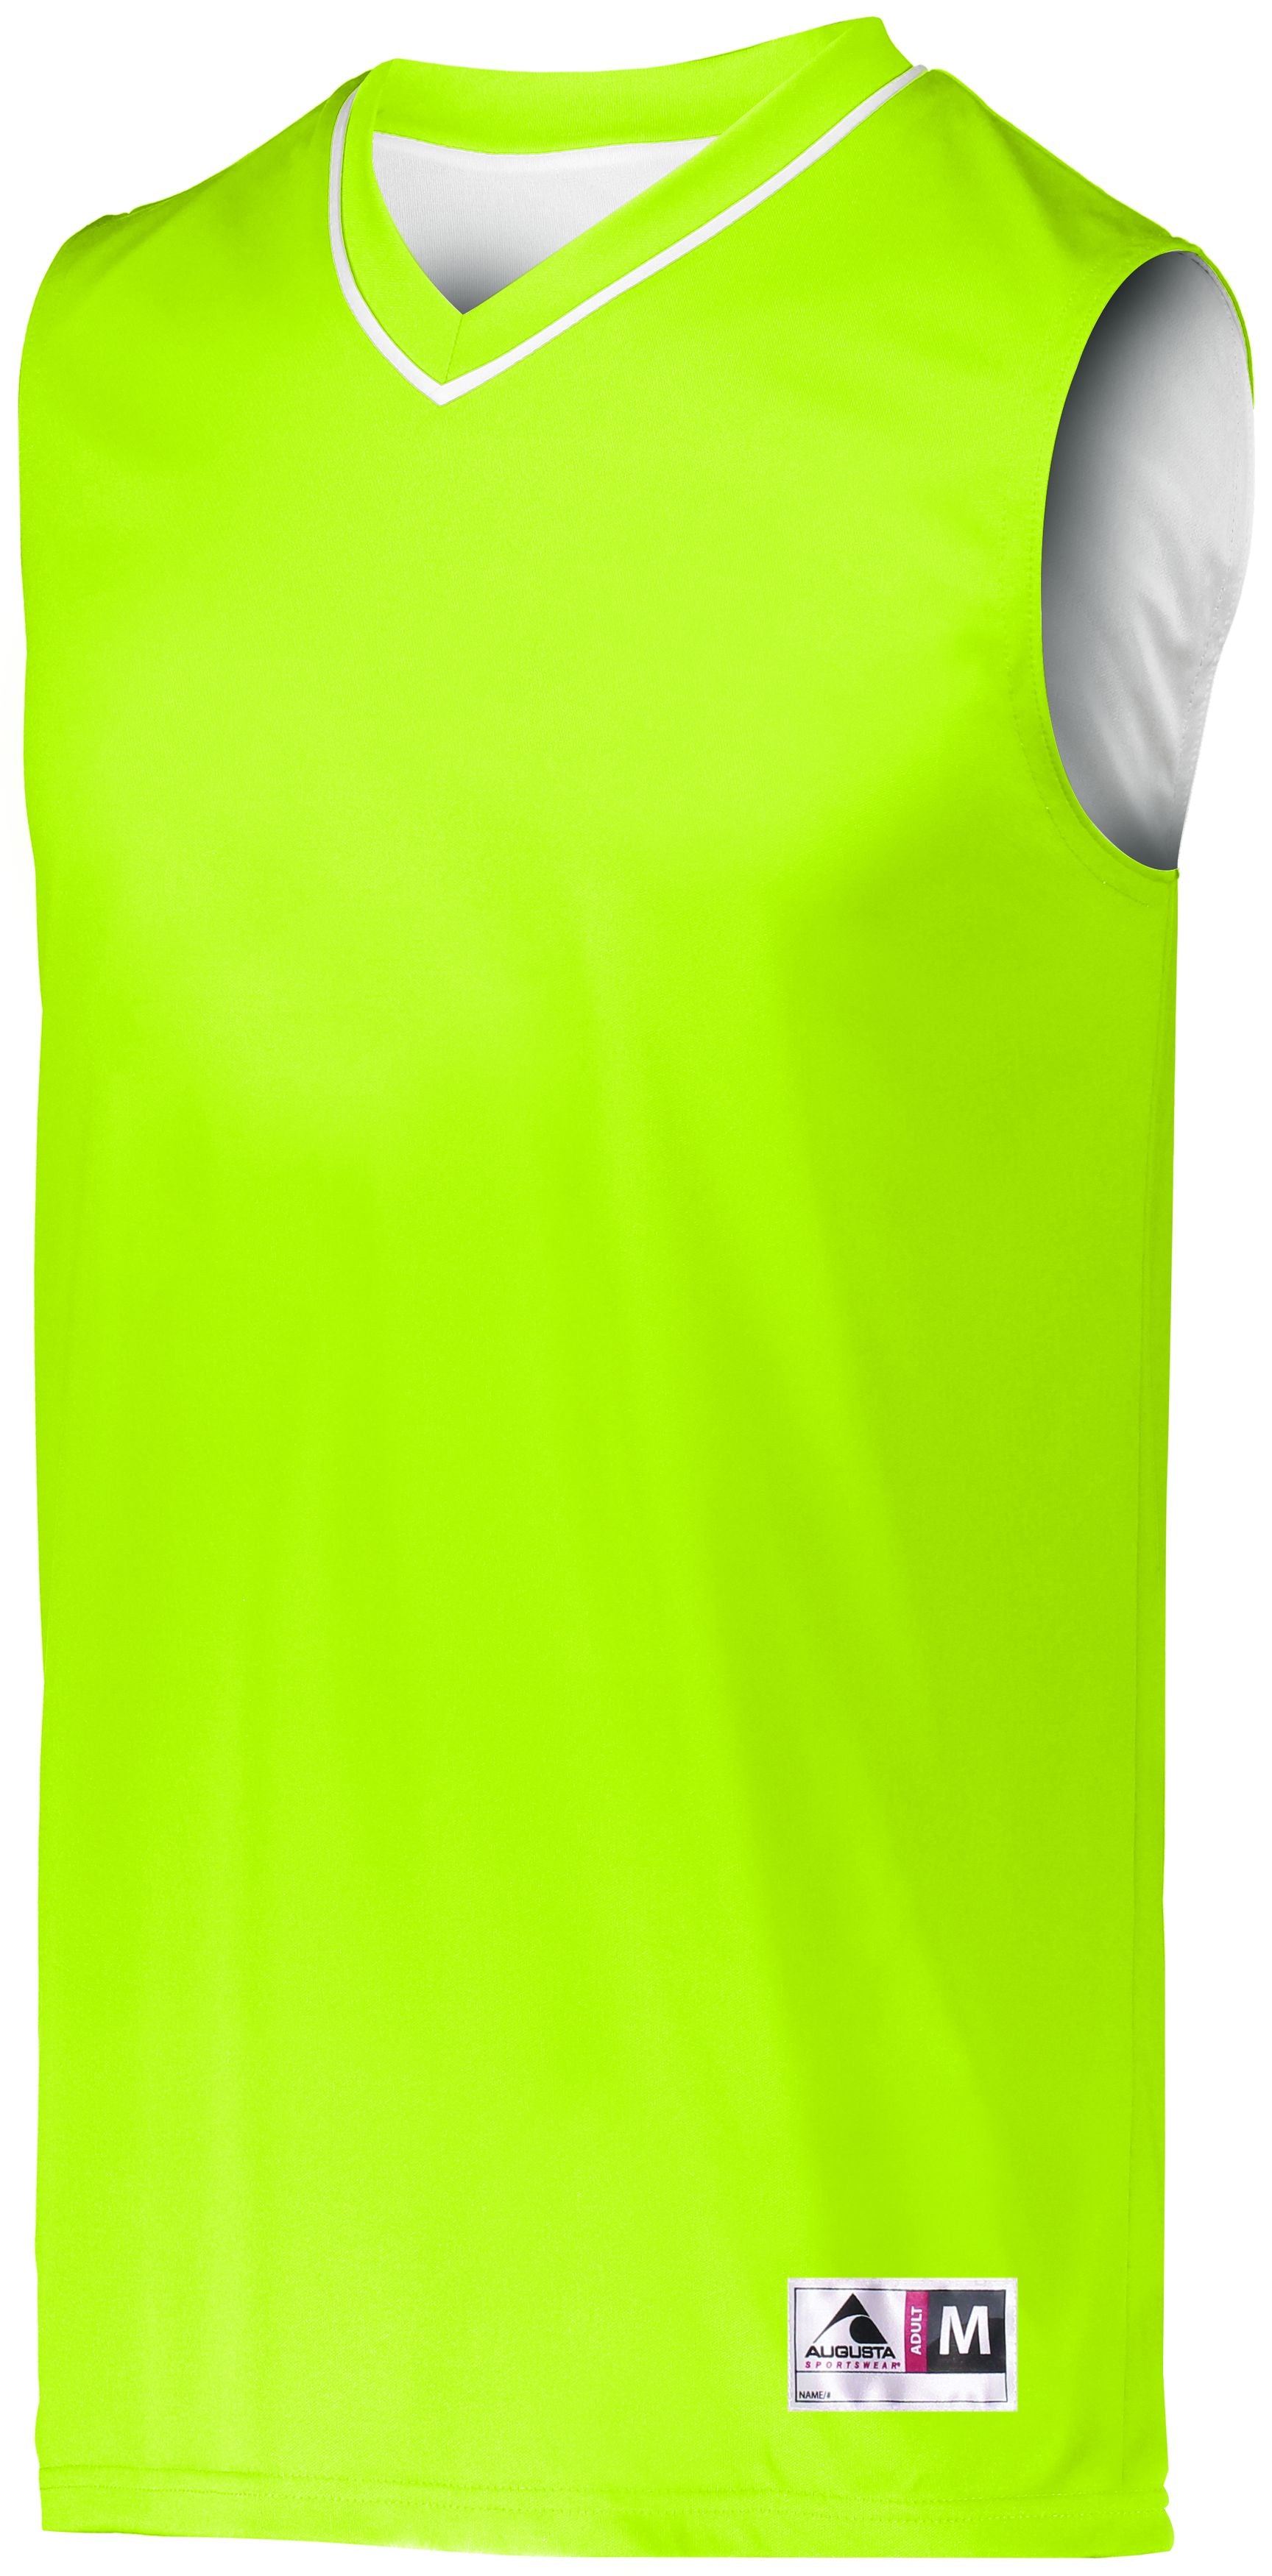 Augusta Sportswear Youth Reversible Two-Color Jersey in Lime/White  -Part of the Youth, Youth-Jersey, Augusta-Products, Basketball, Shirts, All-Sports, All-Sports-1 product lines at KanaleyCreations.com